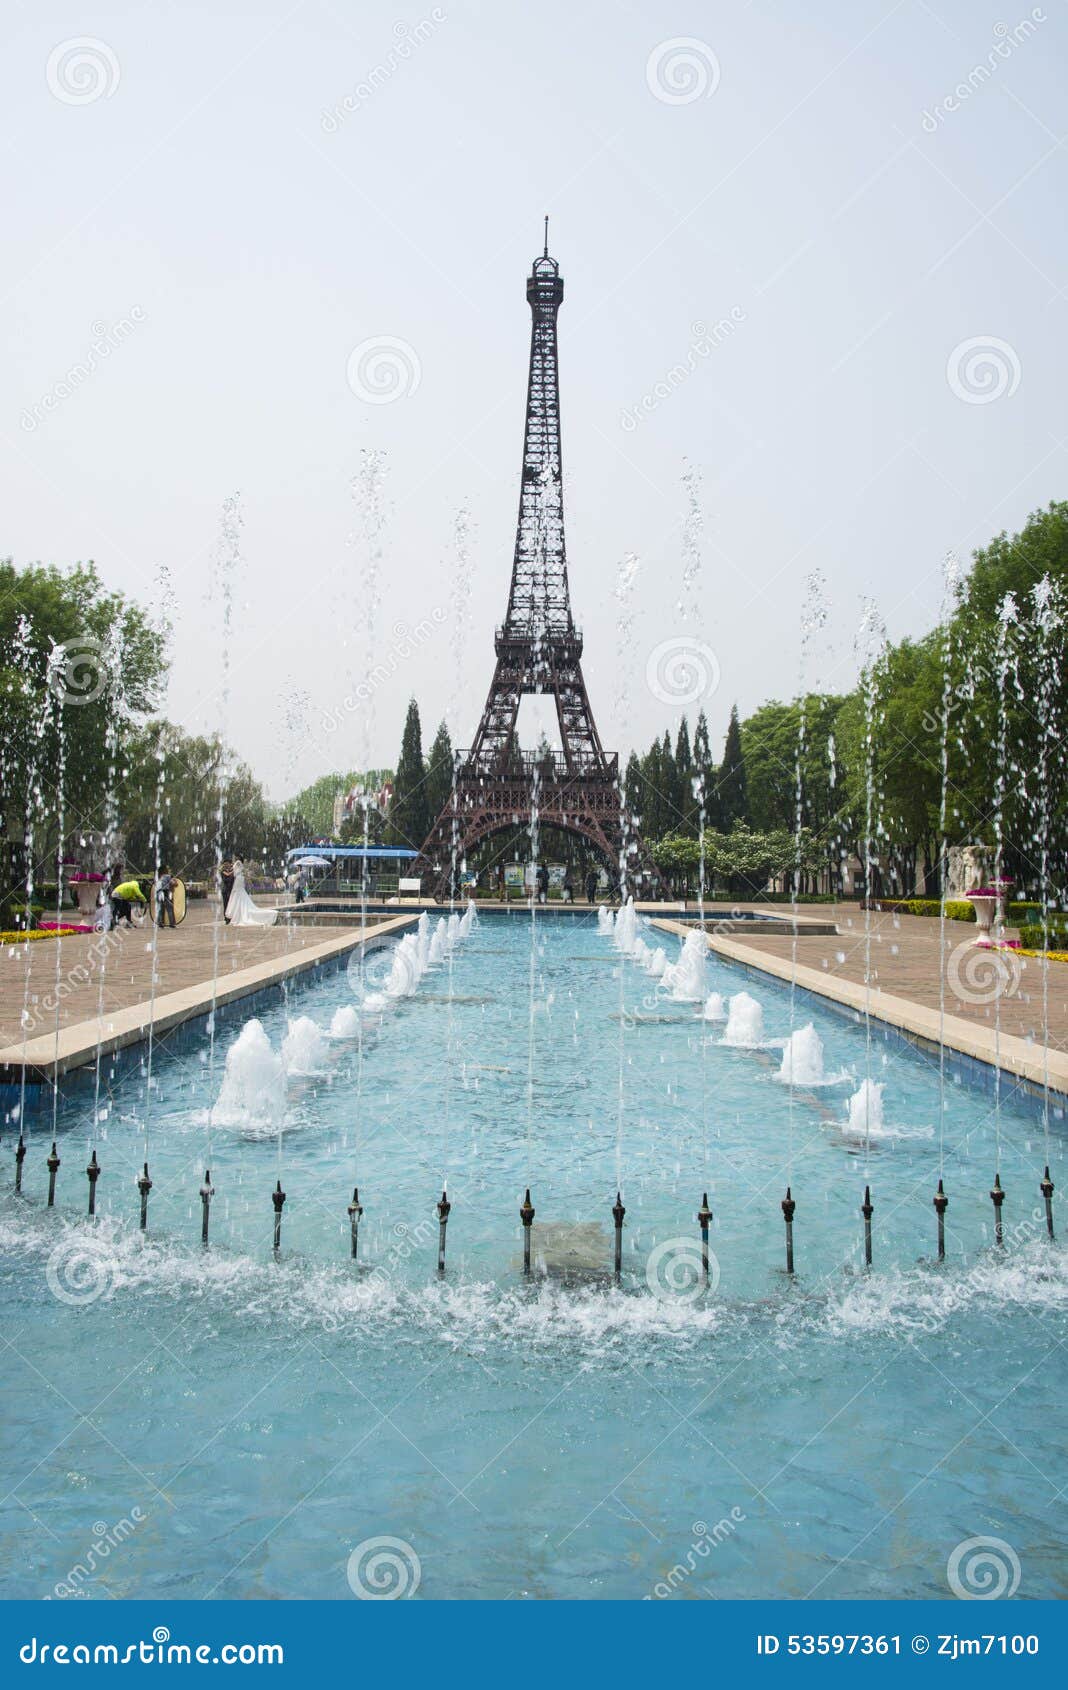 Chinese Asia, Beijing, the World Parkï¼ŒMiniature Landscape, Eiffel Tower  Editorial Photography - Image of tower, miniature: 53597222